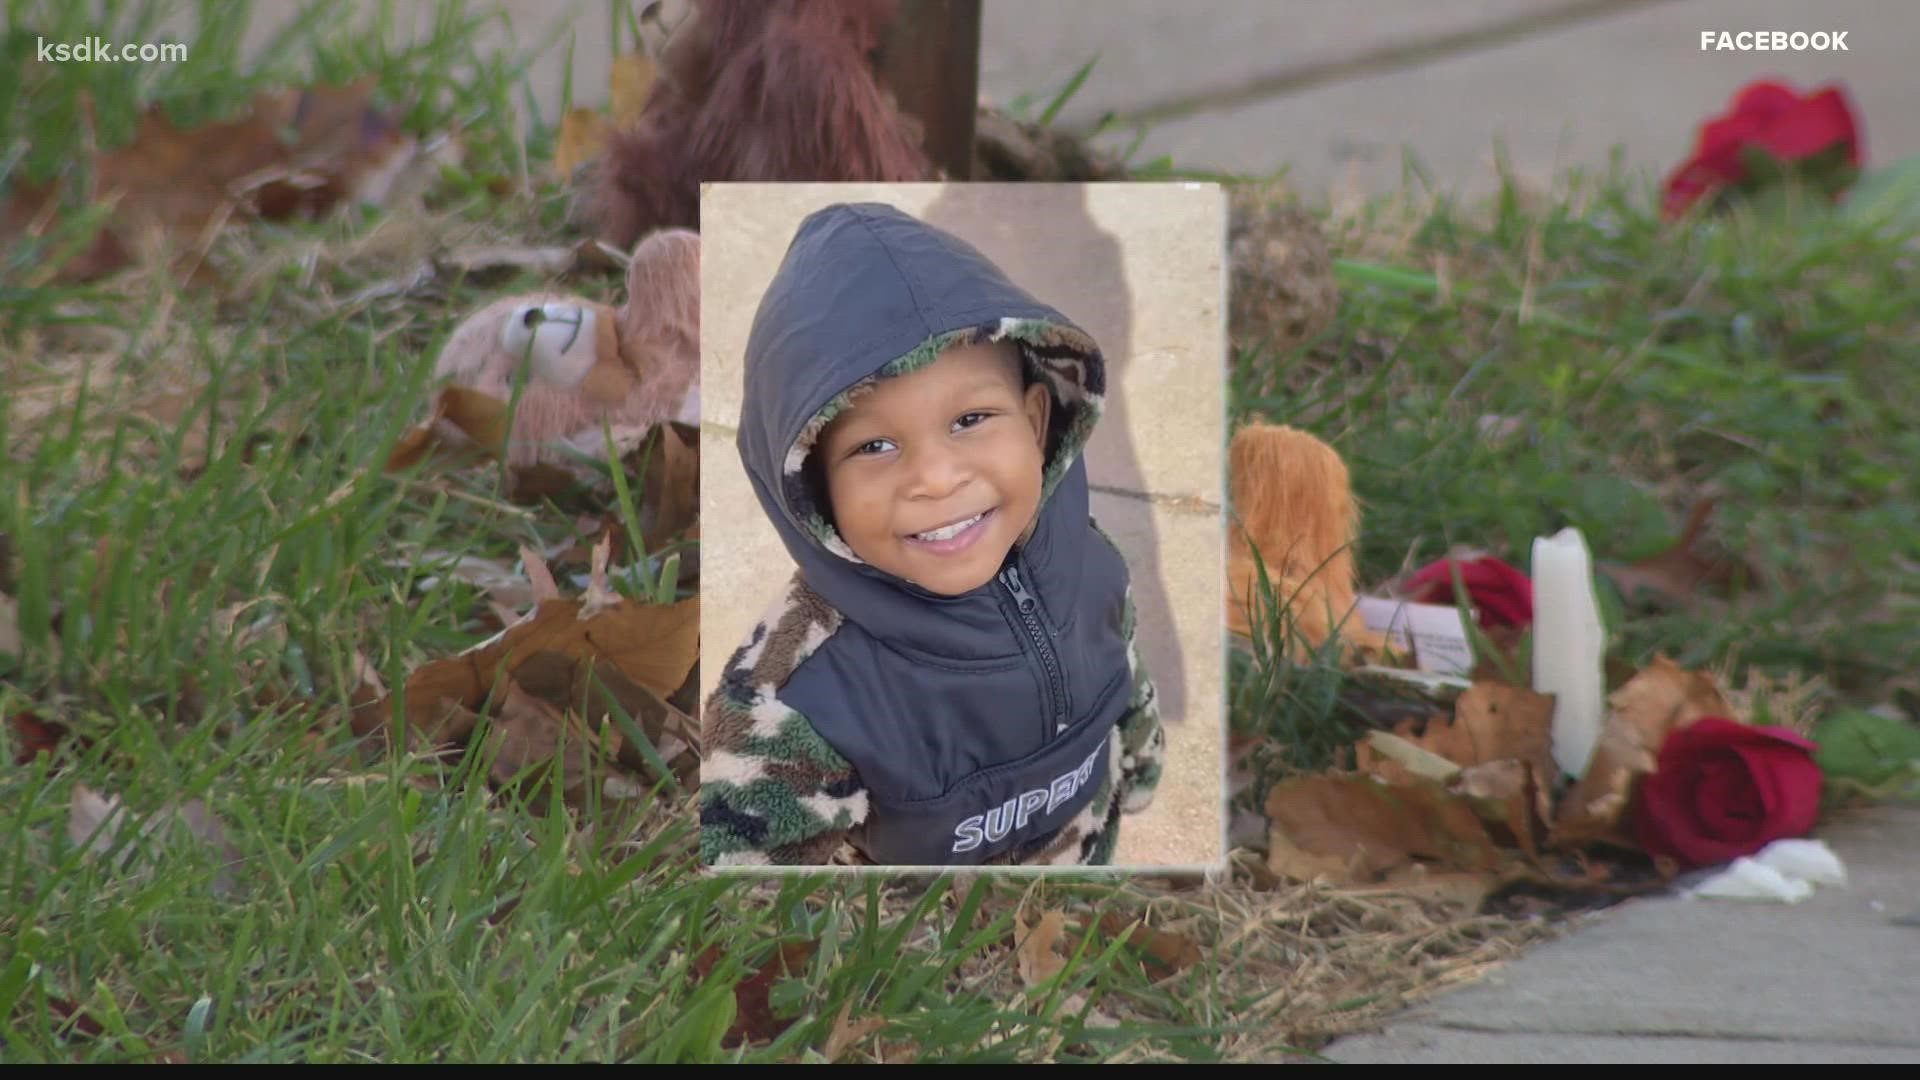 The boy's mother said her boyfriend told her the boy was hit by a car. Police say that's not the case, and they're investigating what happened.